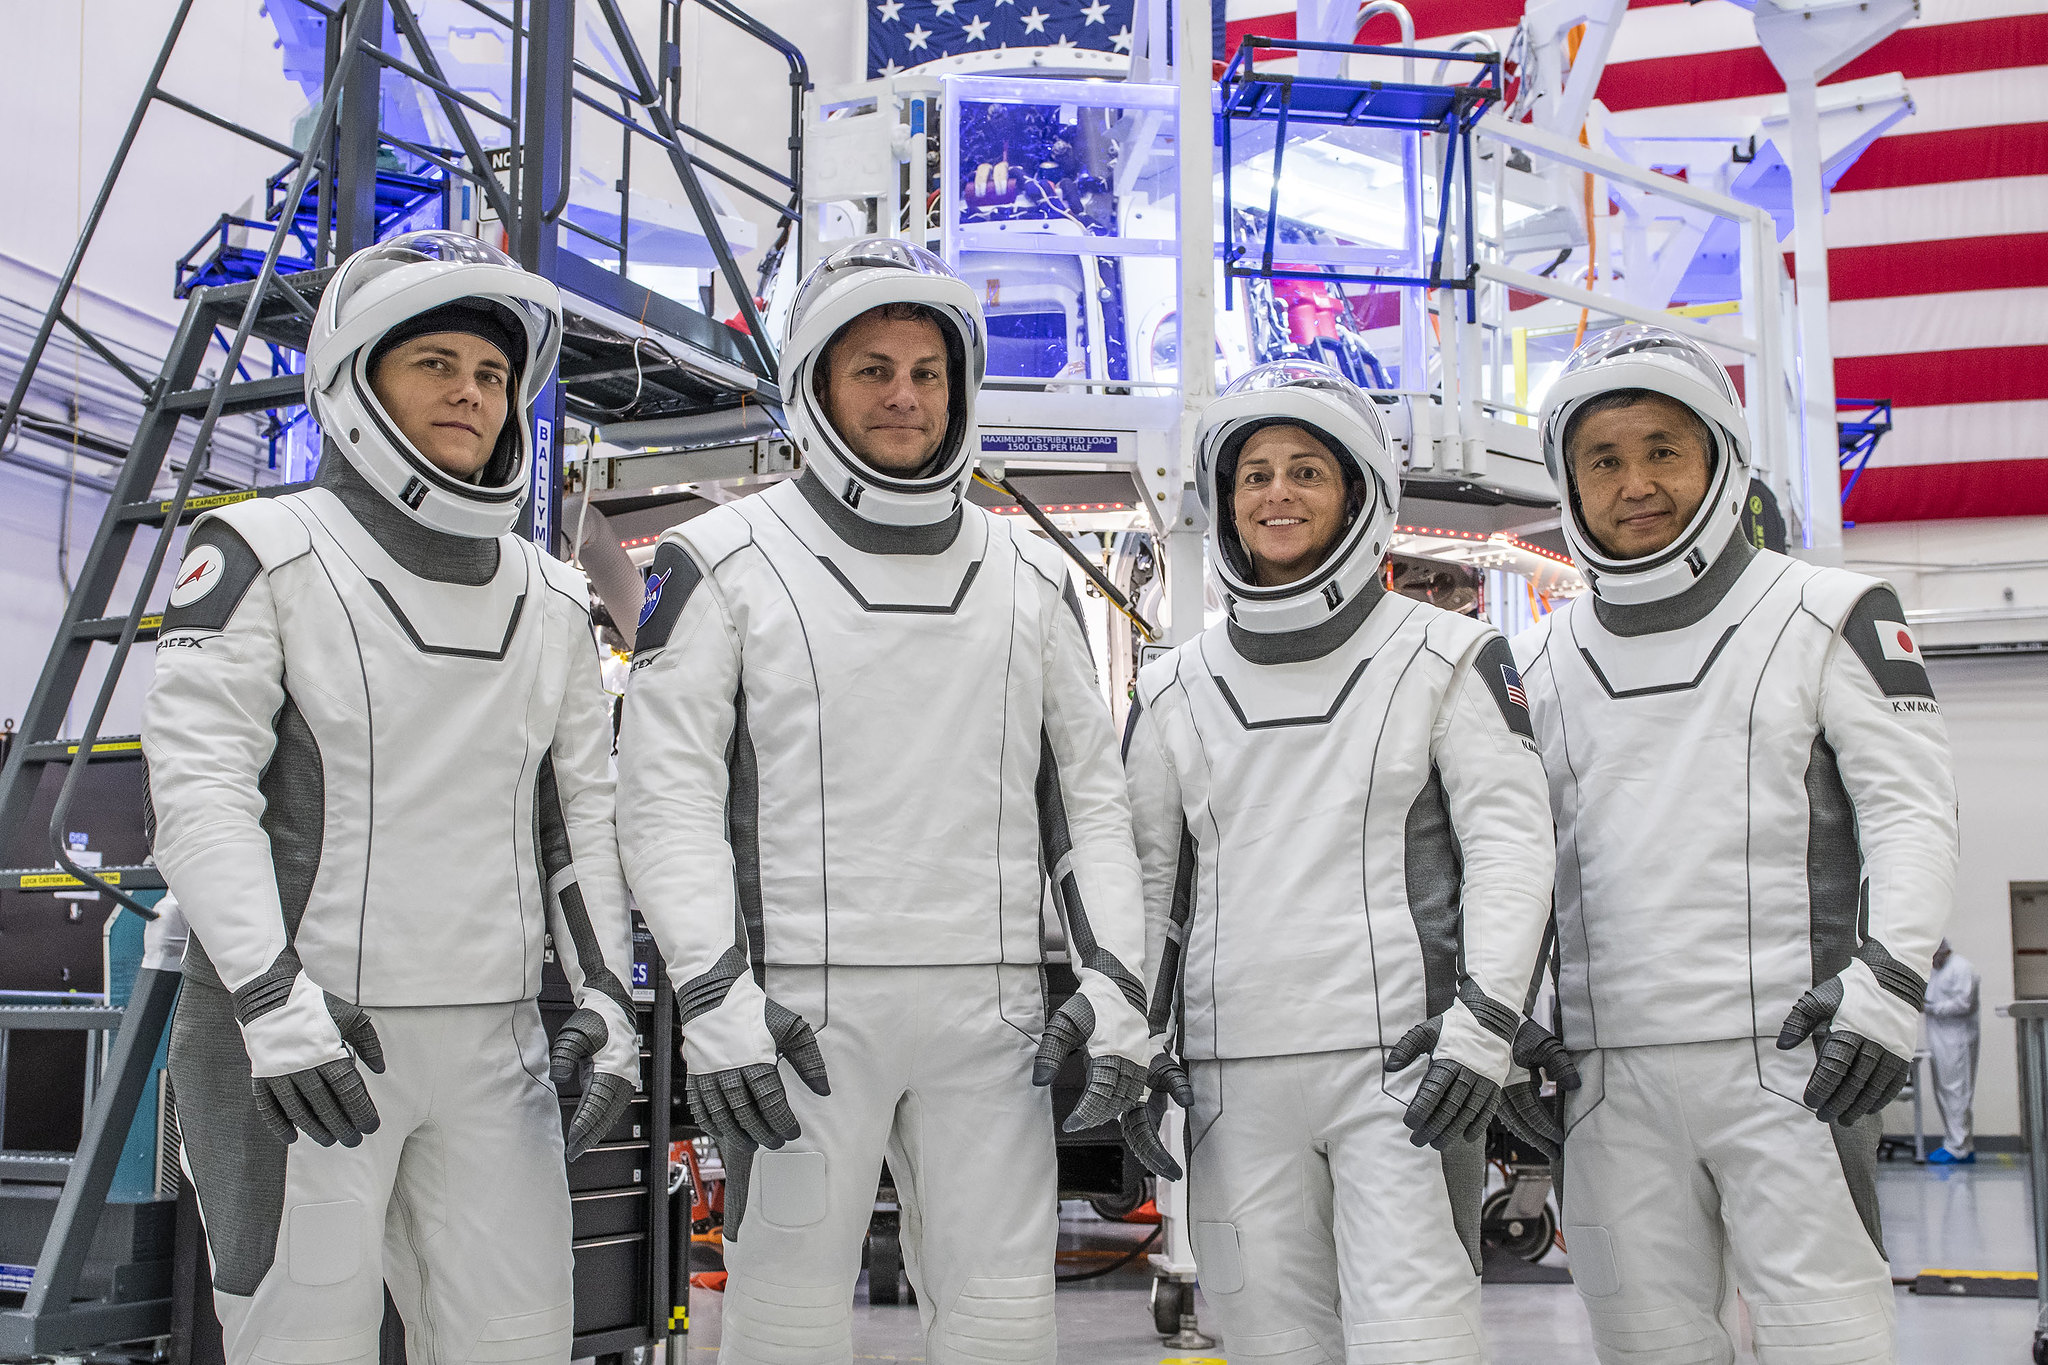 SpaceX Crew-5 astronauts line up in spacesuits in front of unidentified space apparatus and an American flag on a wall